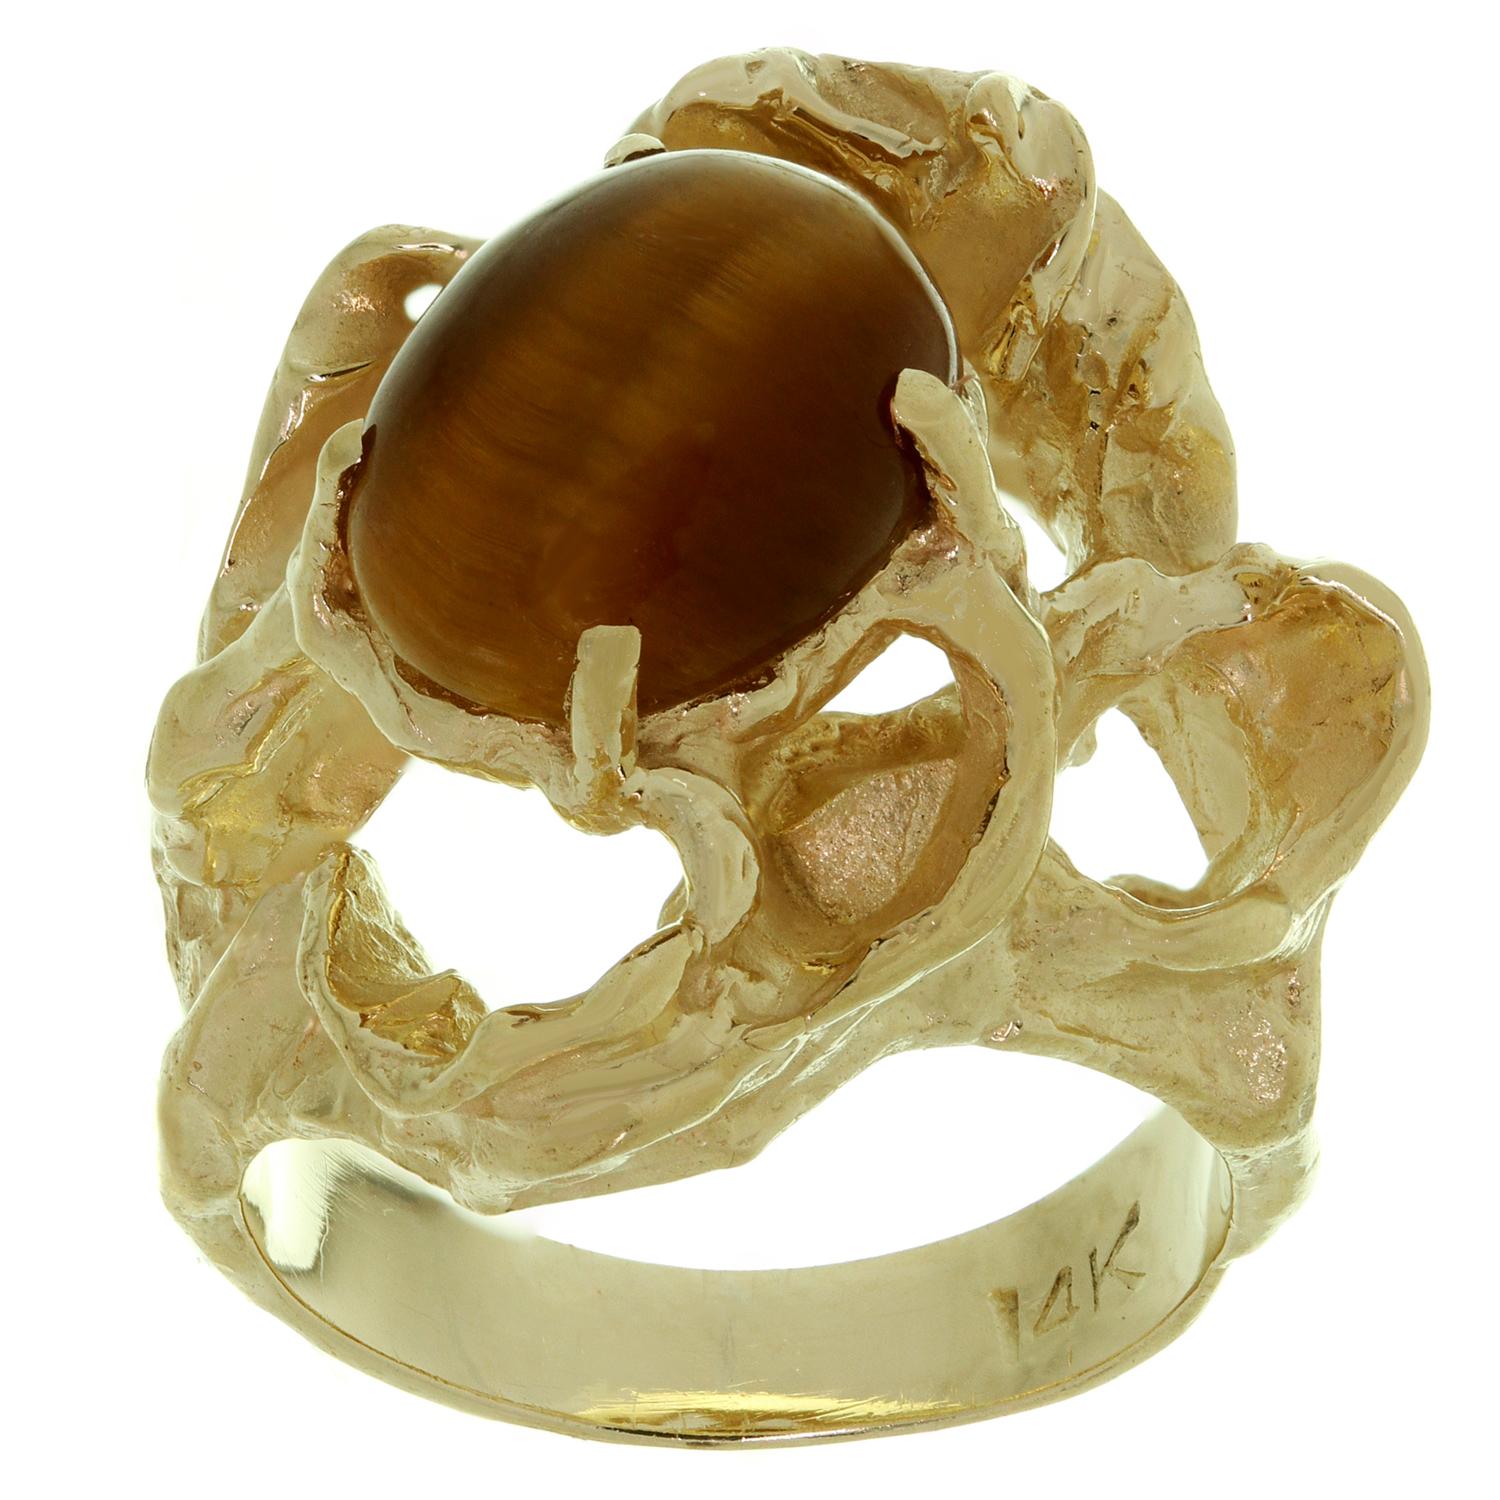 This classic estate nugget ring is crafted in 14k yellow gold and set with a tiger's eye stone in the center. Made in United States circa 1980s. Measurements: 0.74